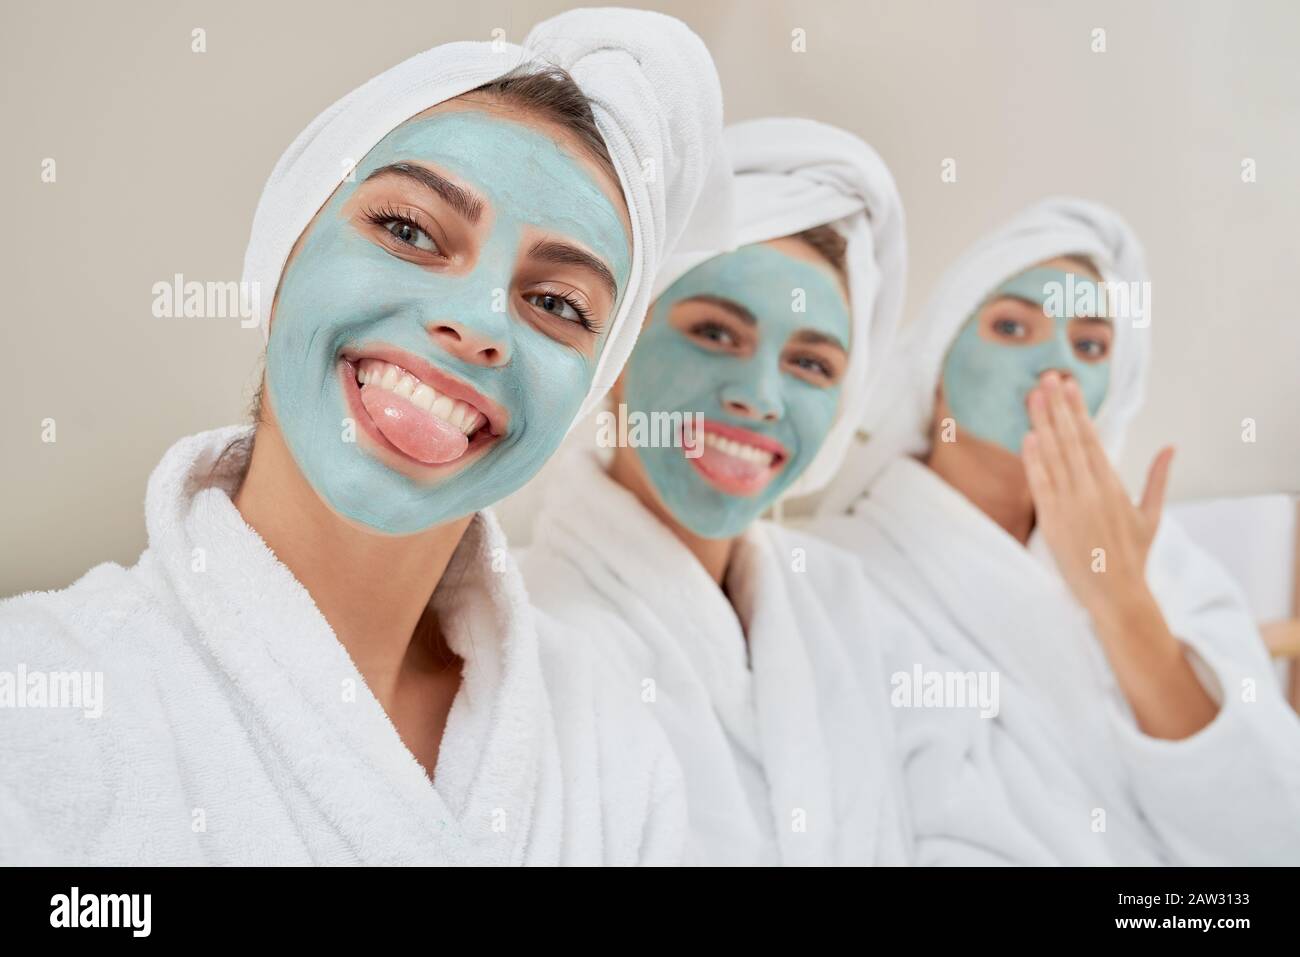 Close up of smiling group of girls with cosmetic masks, in towels on heads and bathrobes taking selfie after shower in bedroom. Three emotional girls having fun. Concept of friendship, skincare. Stock Photo